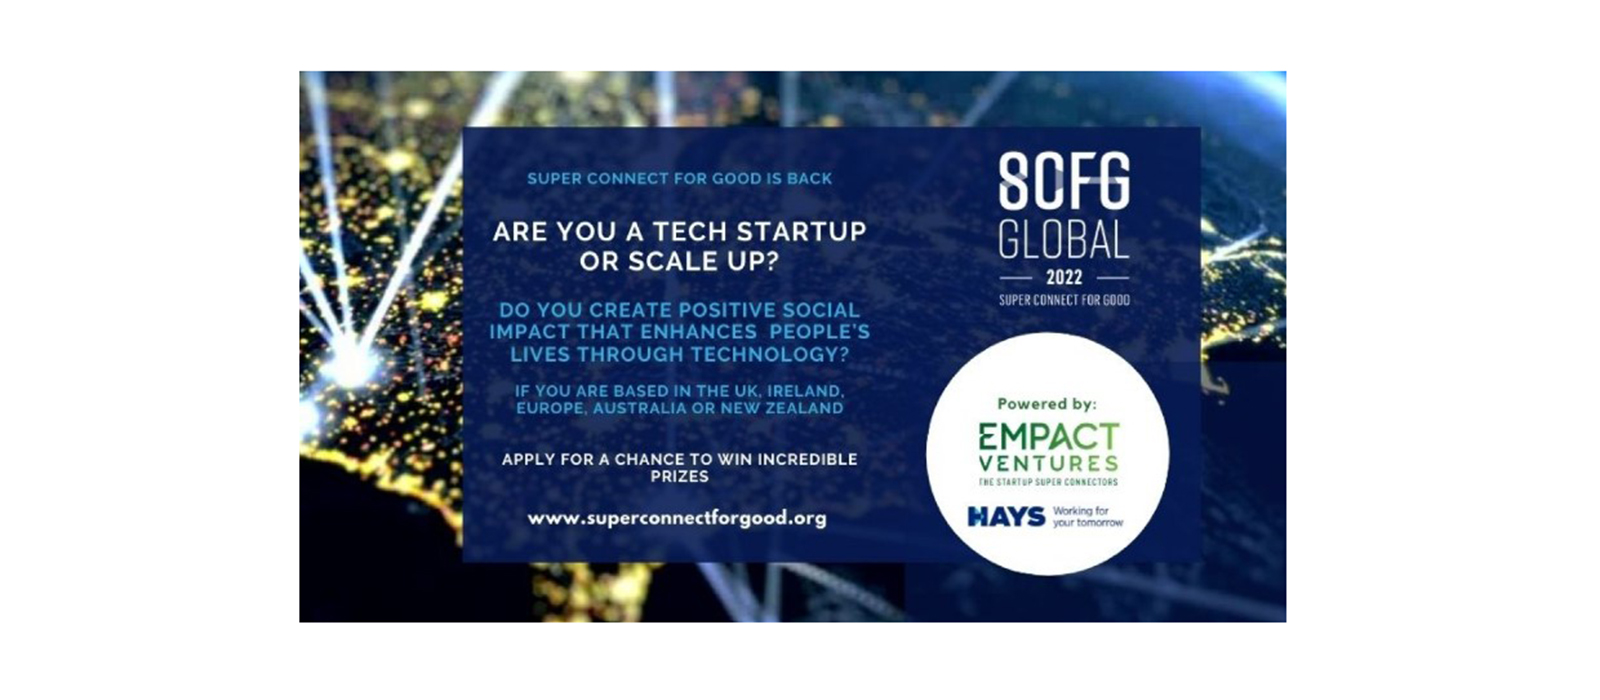 eg technology collaborate with Empact Ventures for 2022 Super Connect for Good Competition